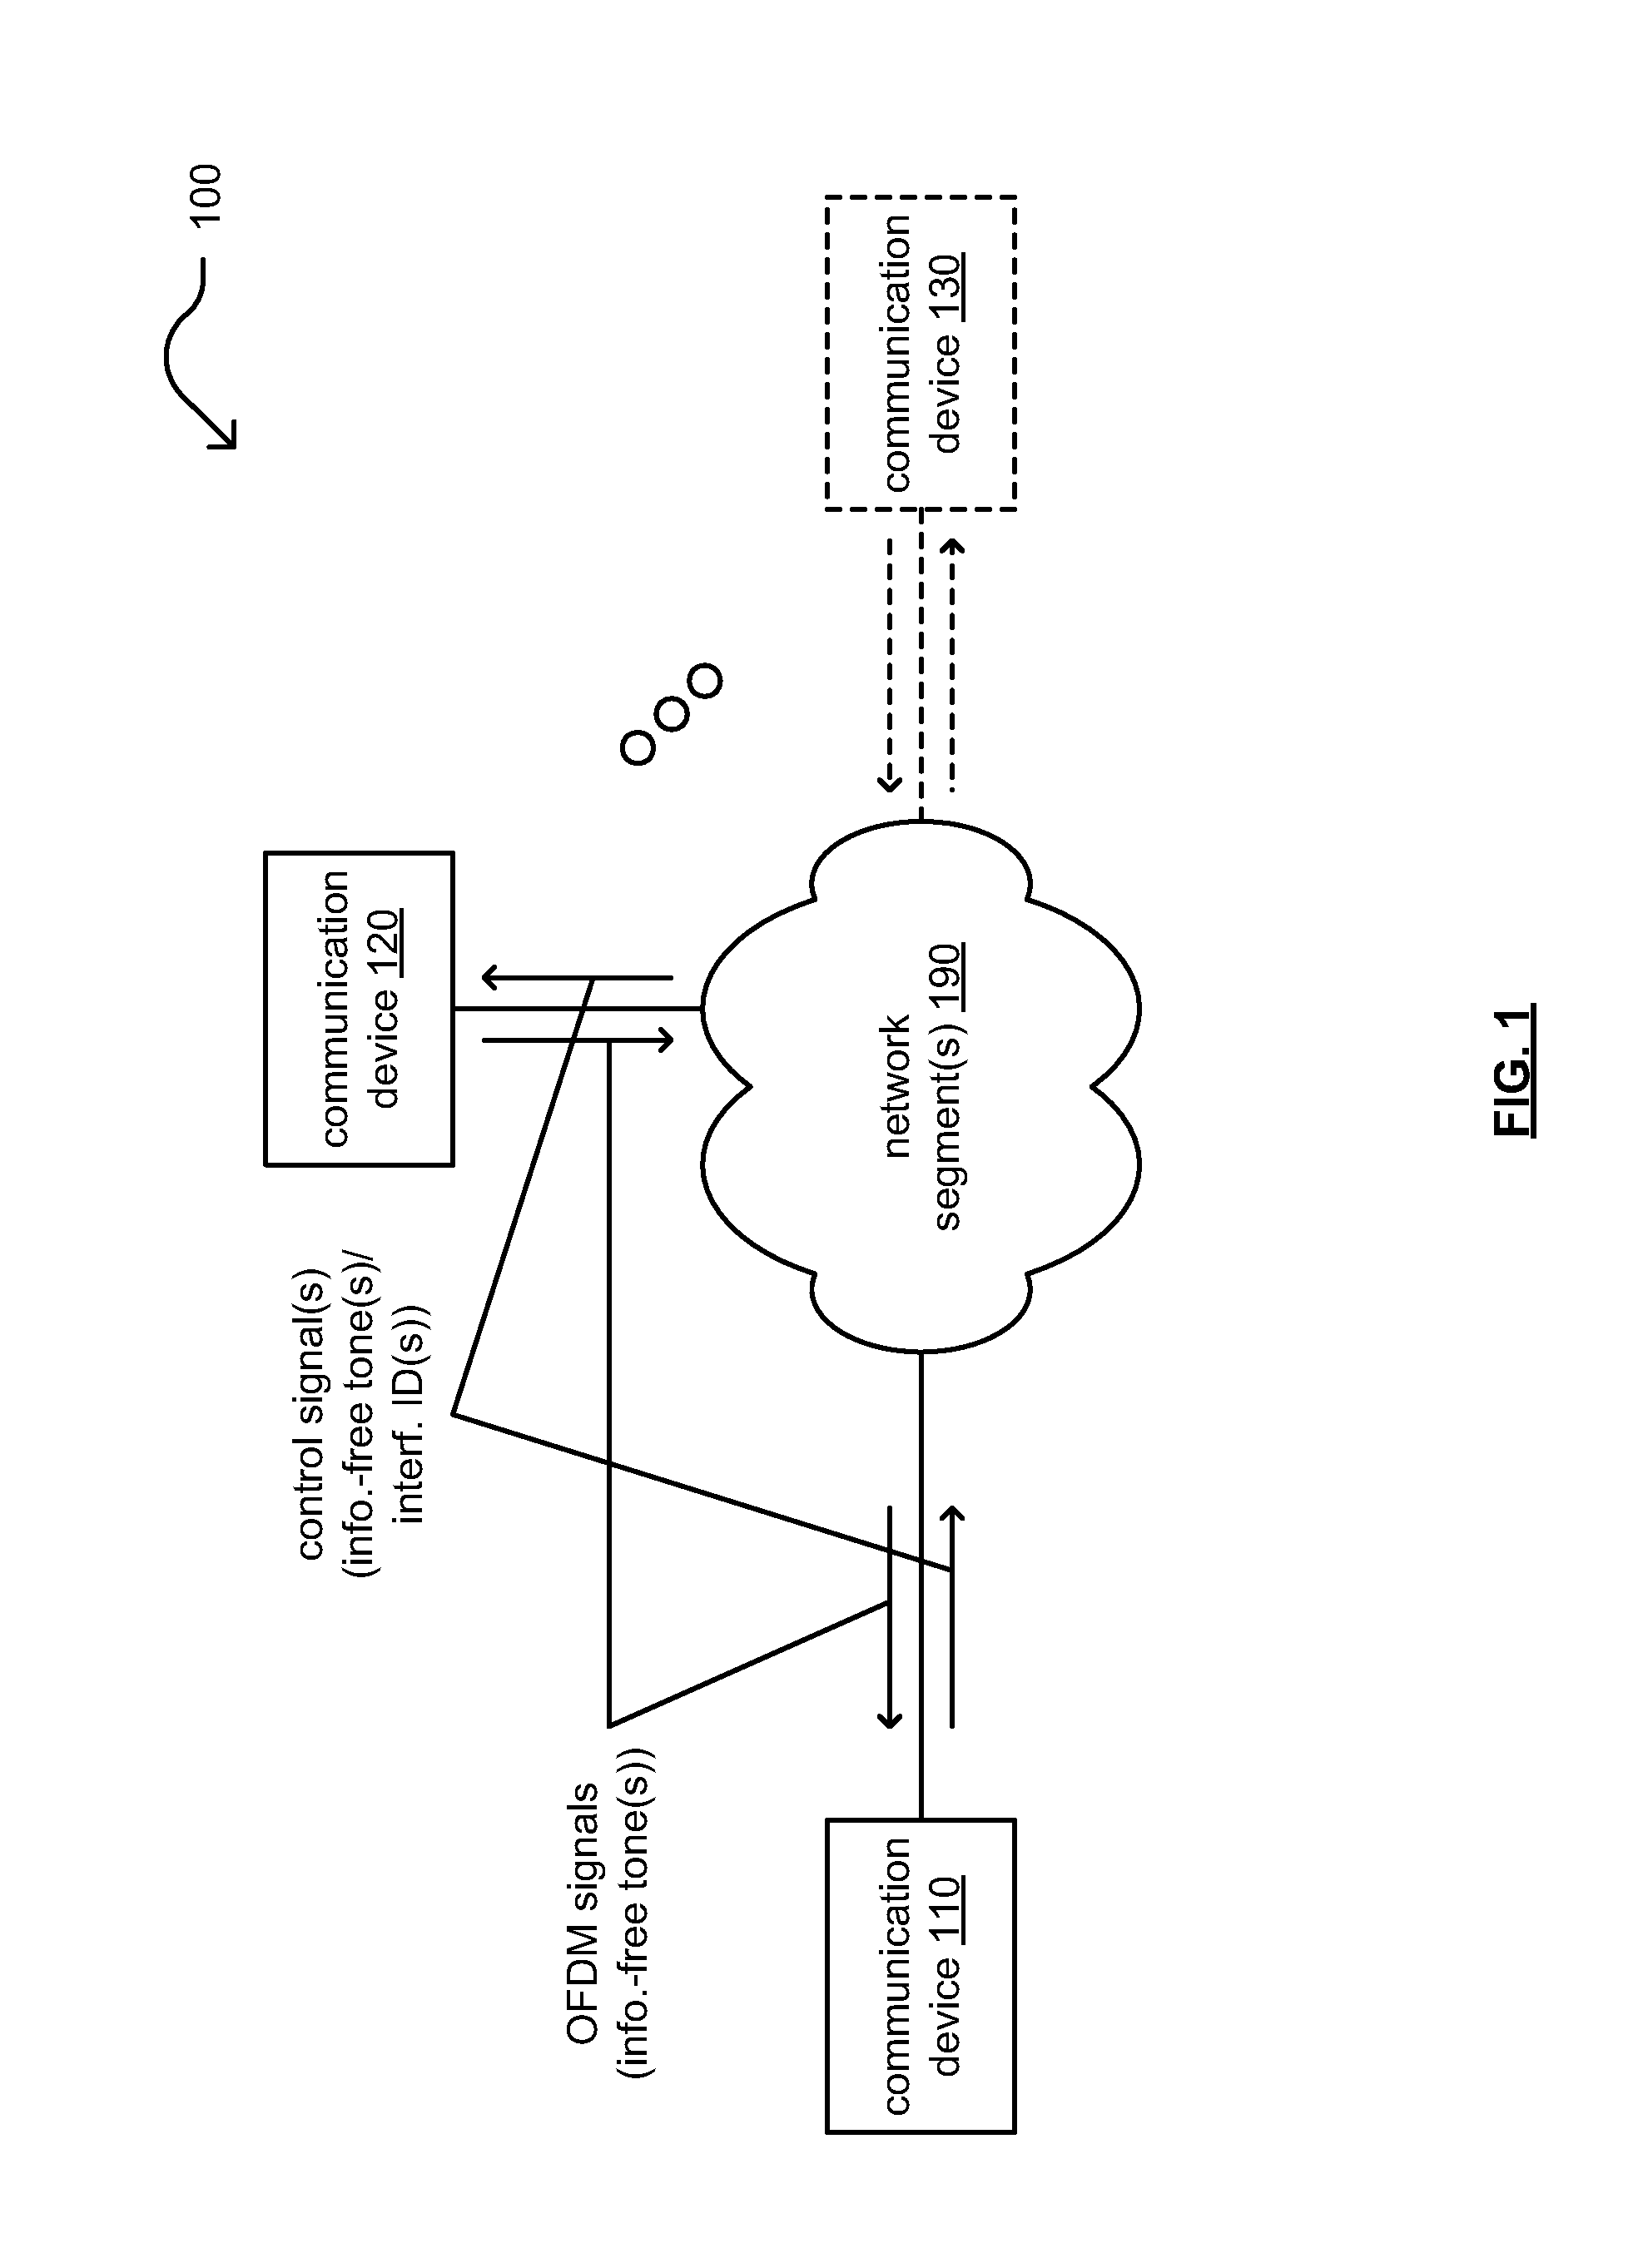 Interference cancellation within OFDM communications